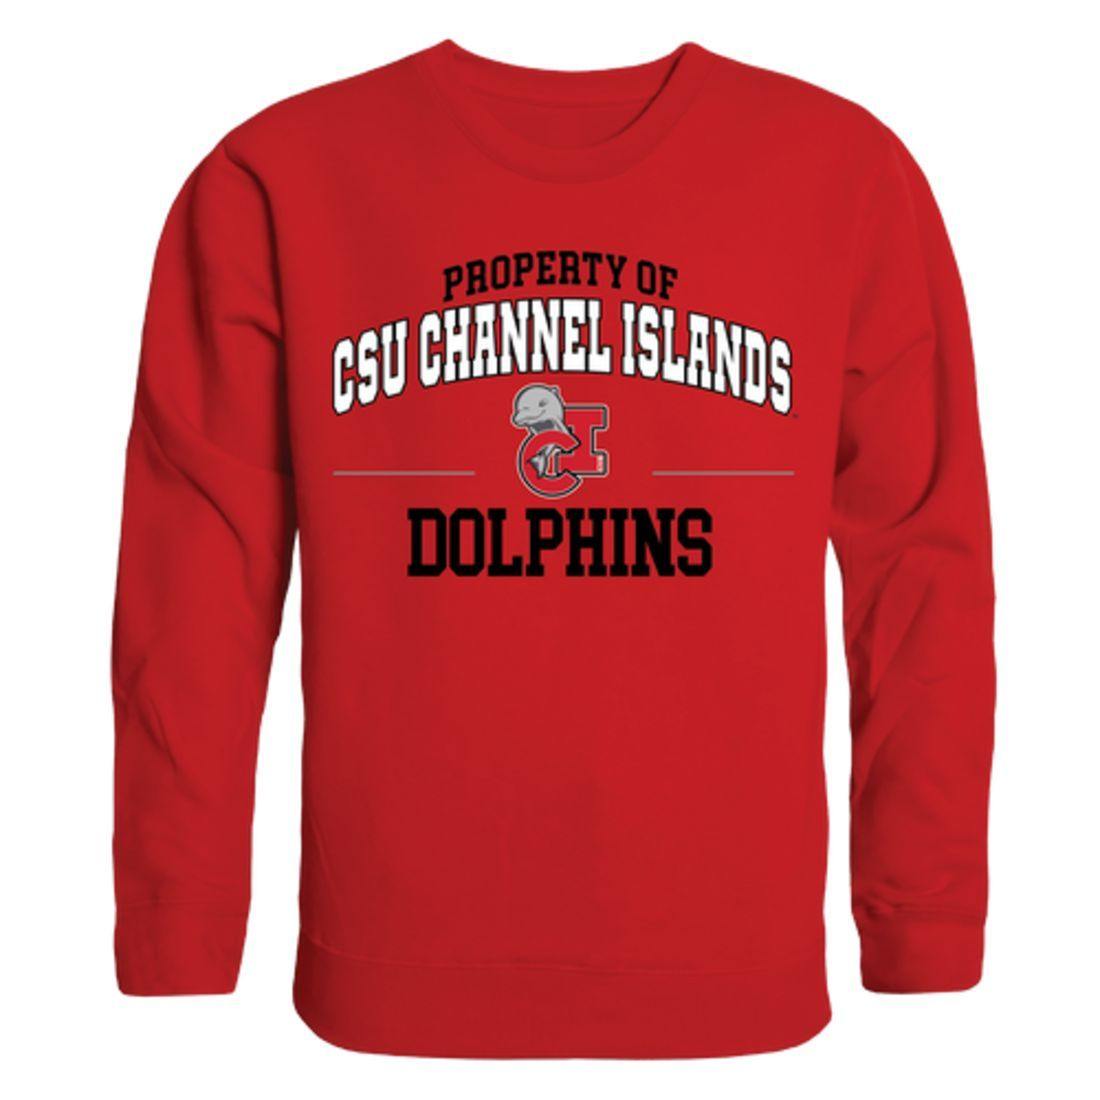 CSUCI CalIfornia State University Channel Islands The Dolphins Property Crewneck Pullover Sweatshirt Sweater Red-Campus-Wardrobe